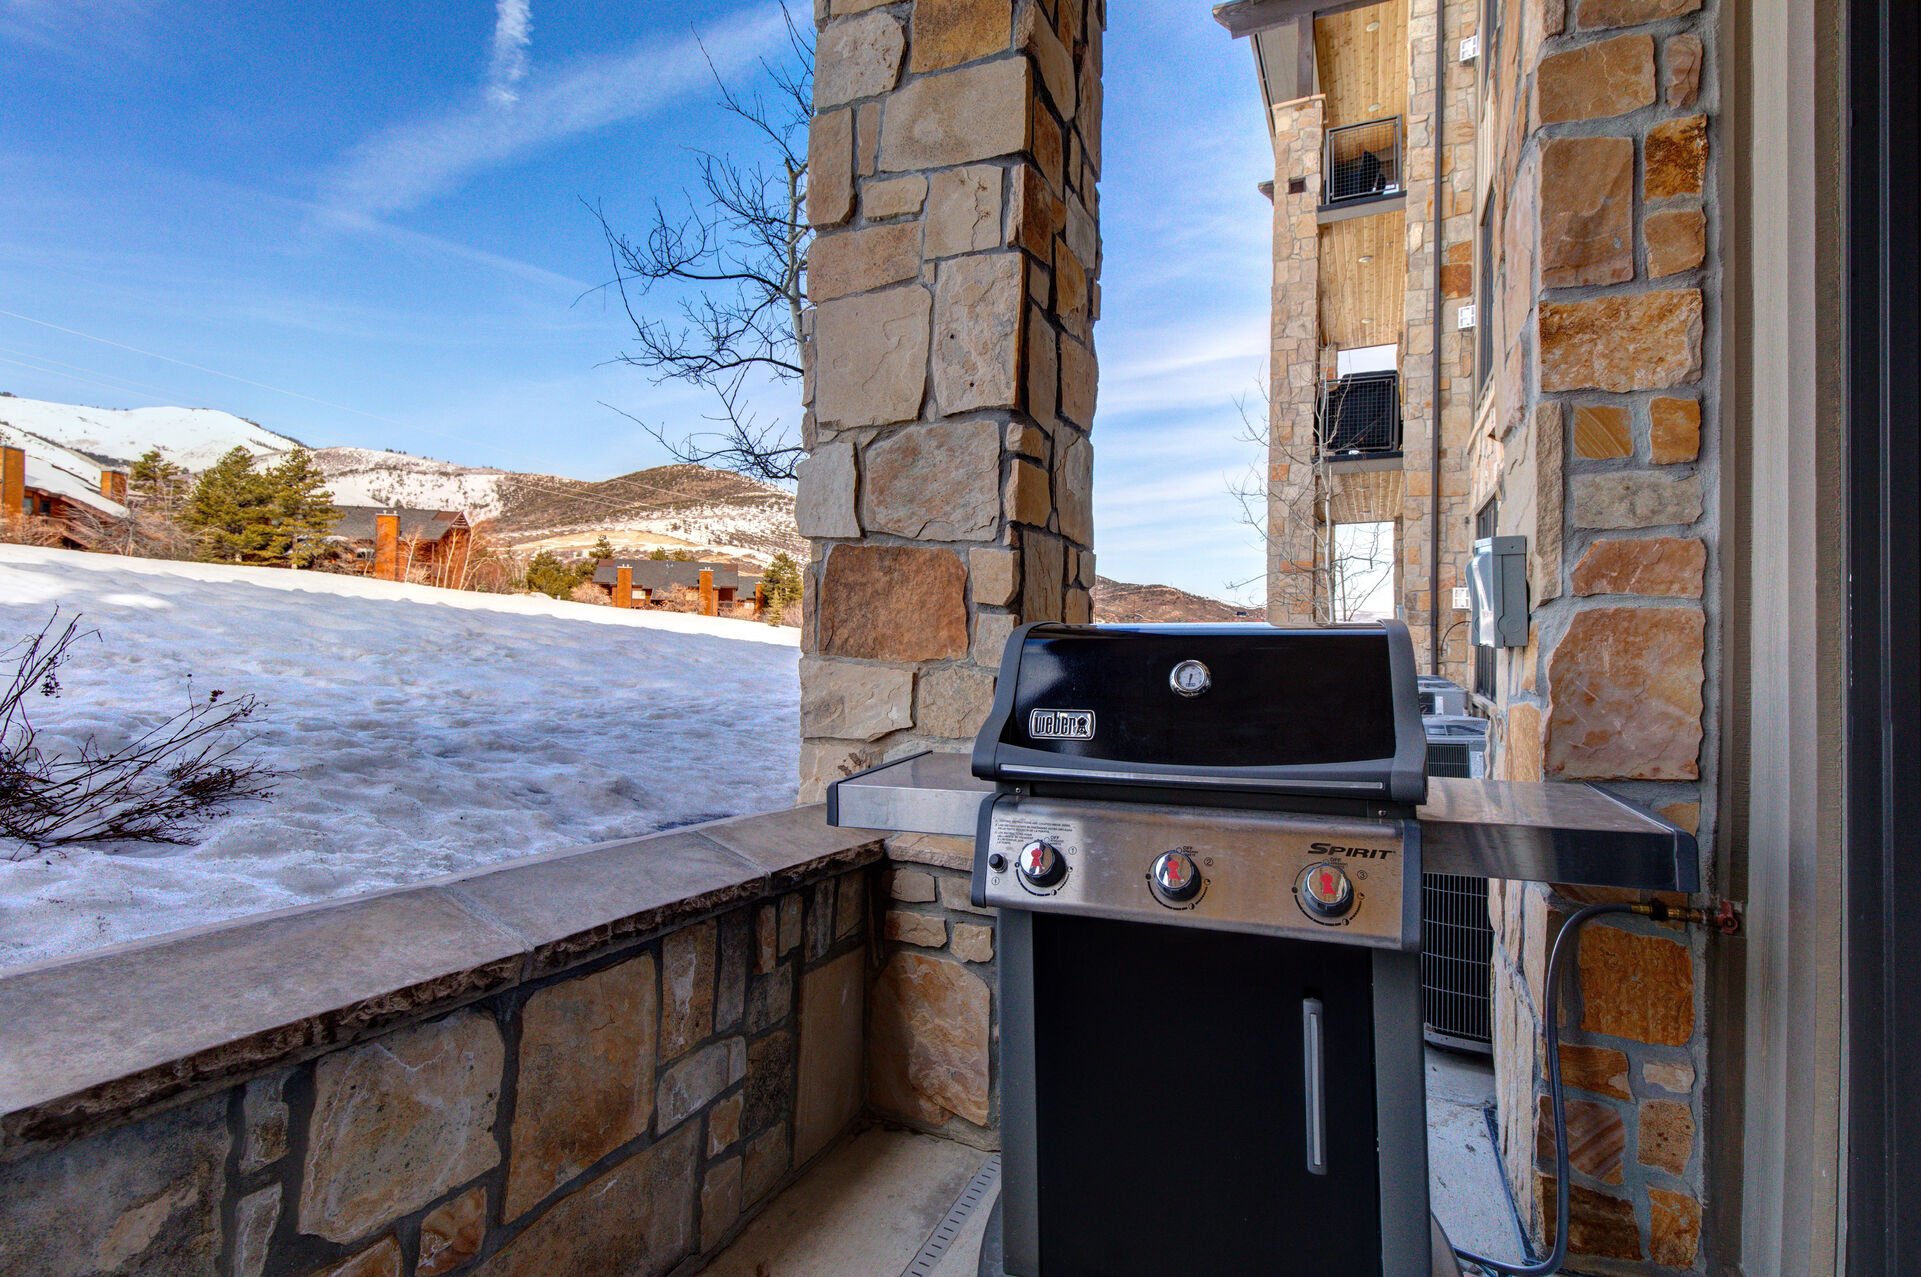 Gas BBQ on the outdoor private patio overlooking the golf course